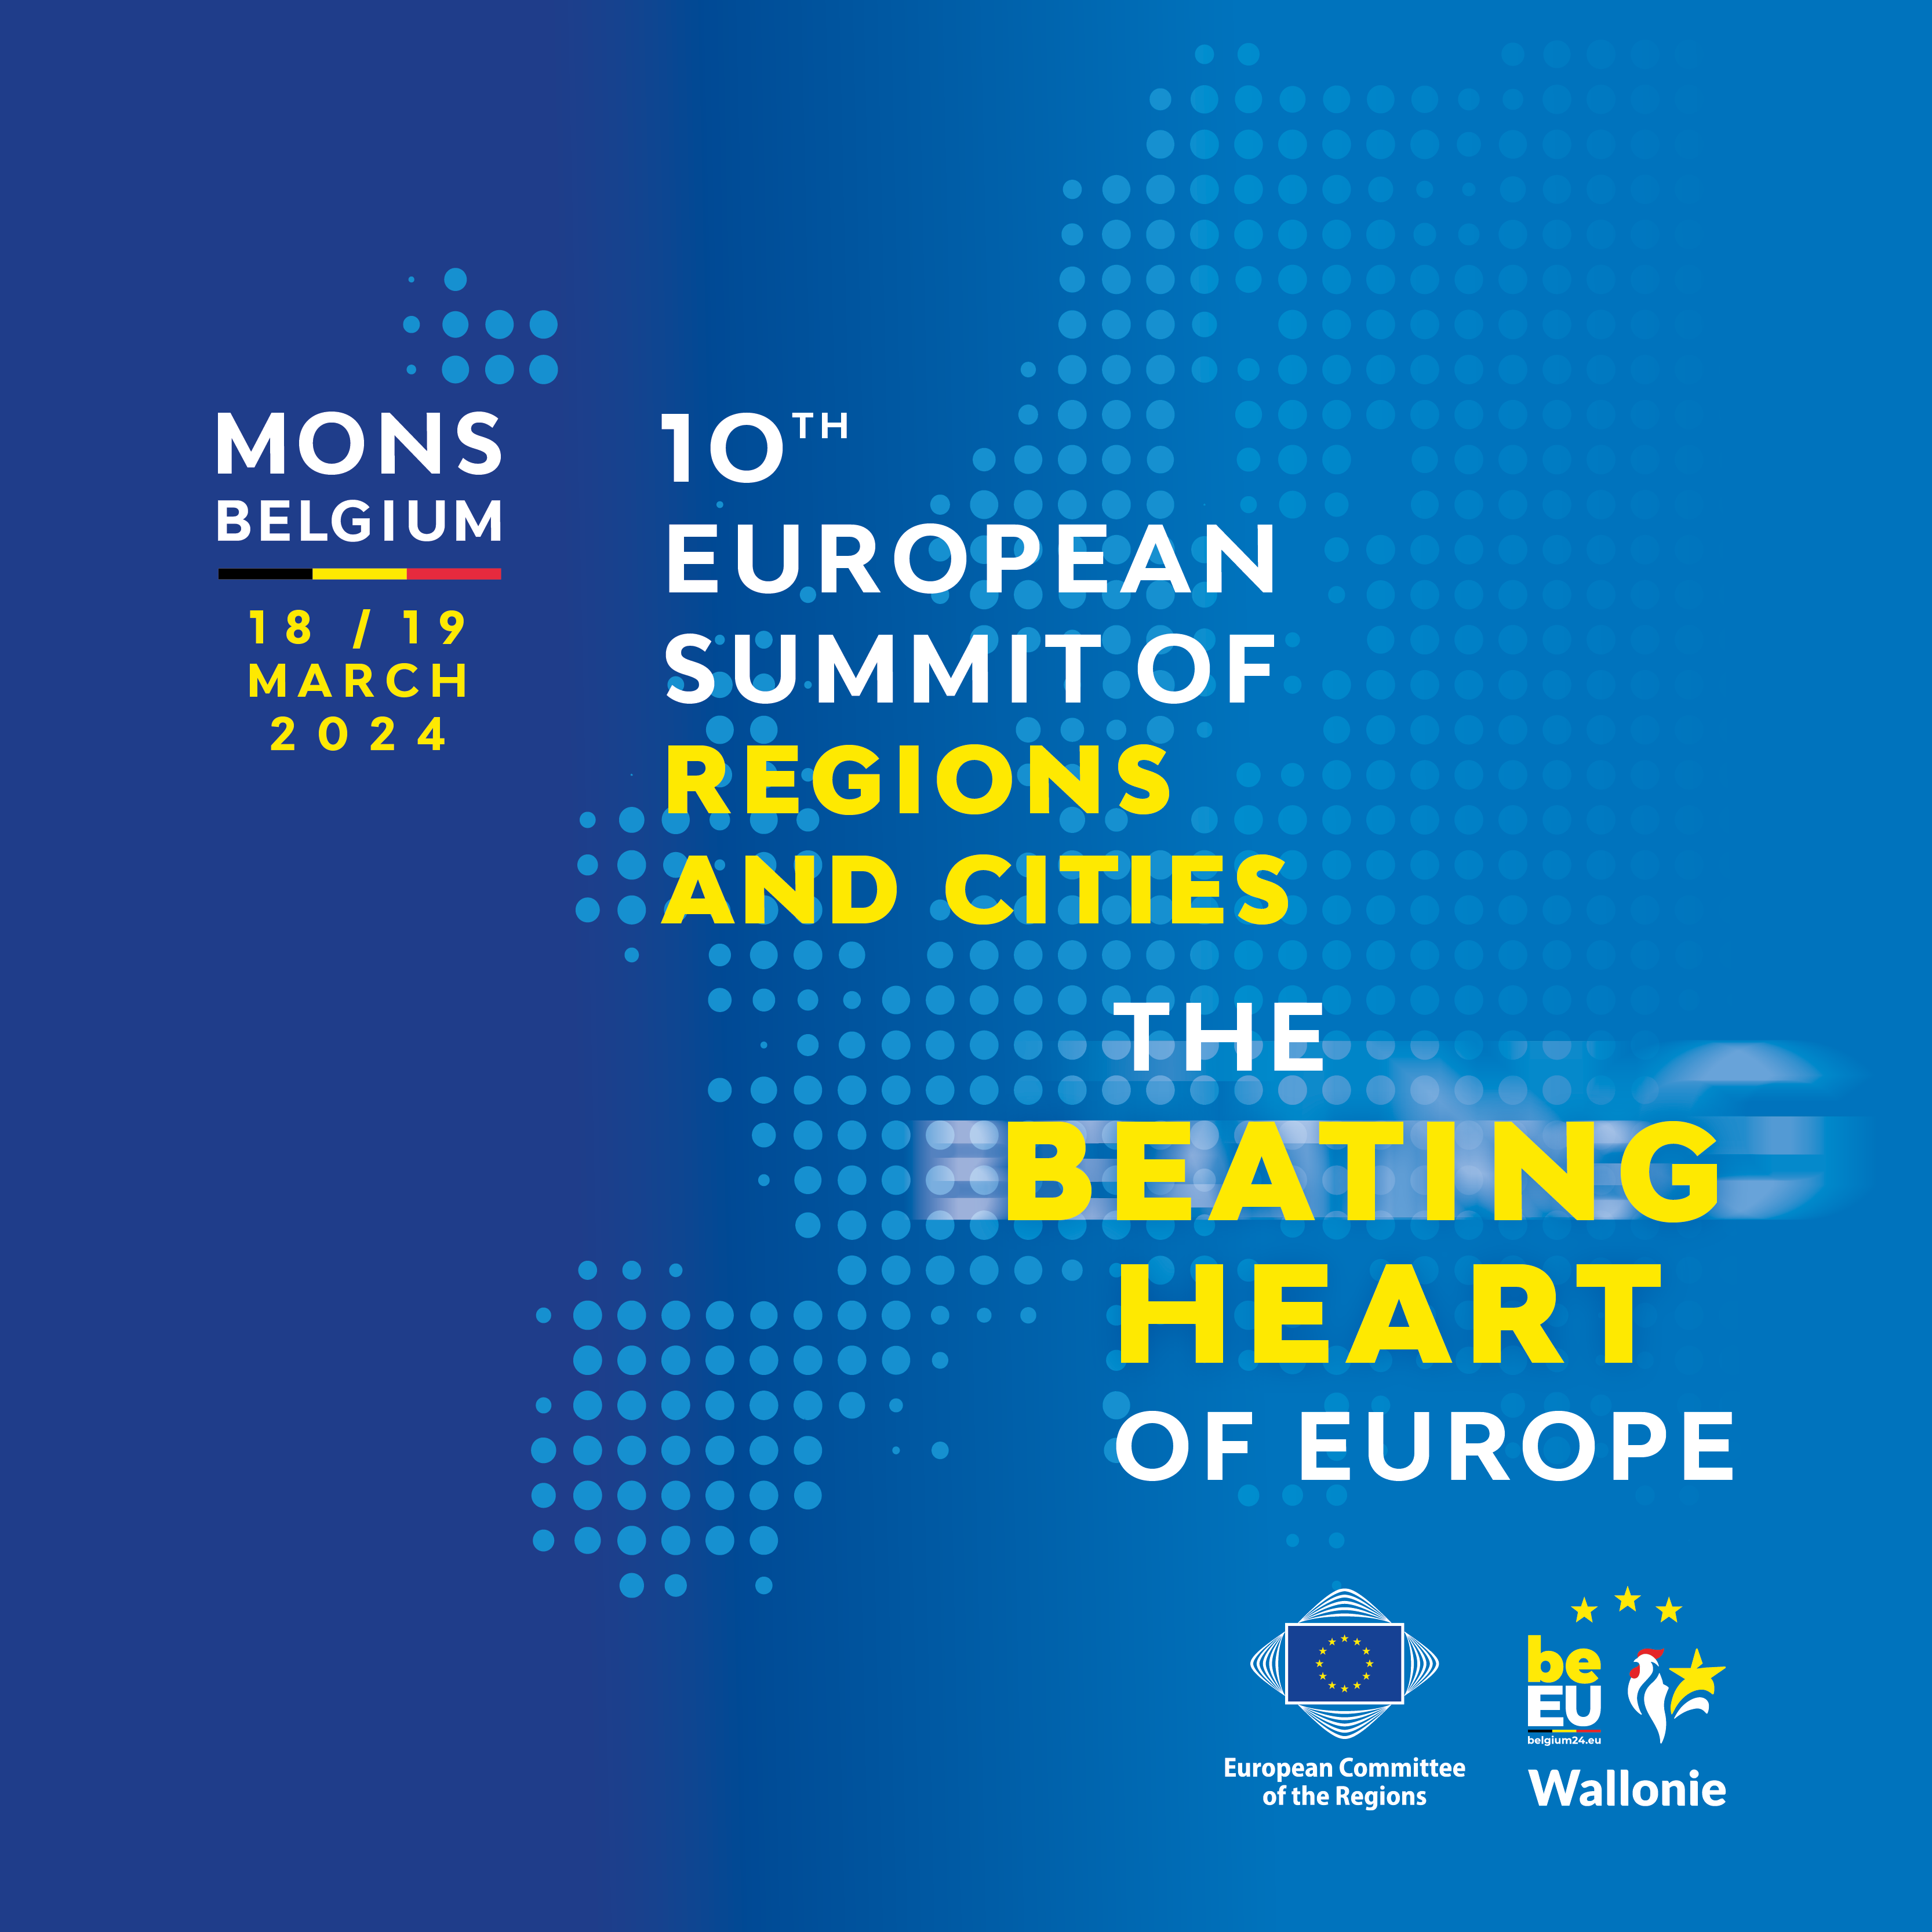 18 and 19 March: European Summit of Regions and Cities in the name of cohesion policies